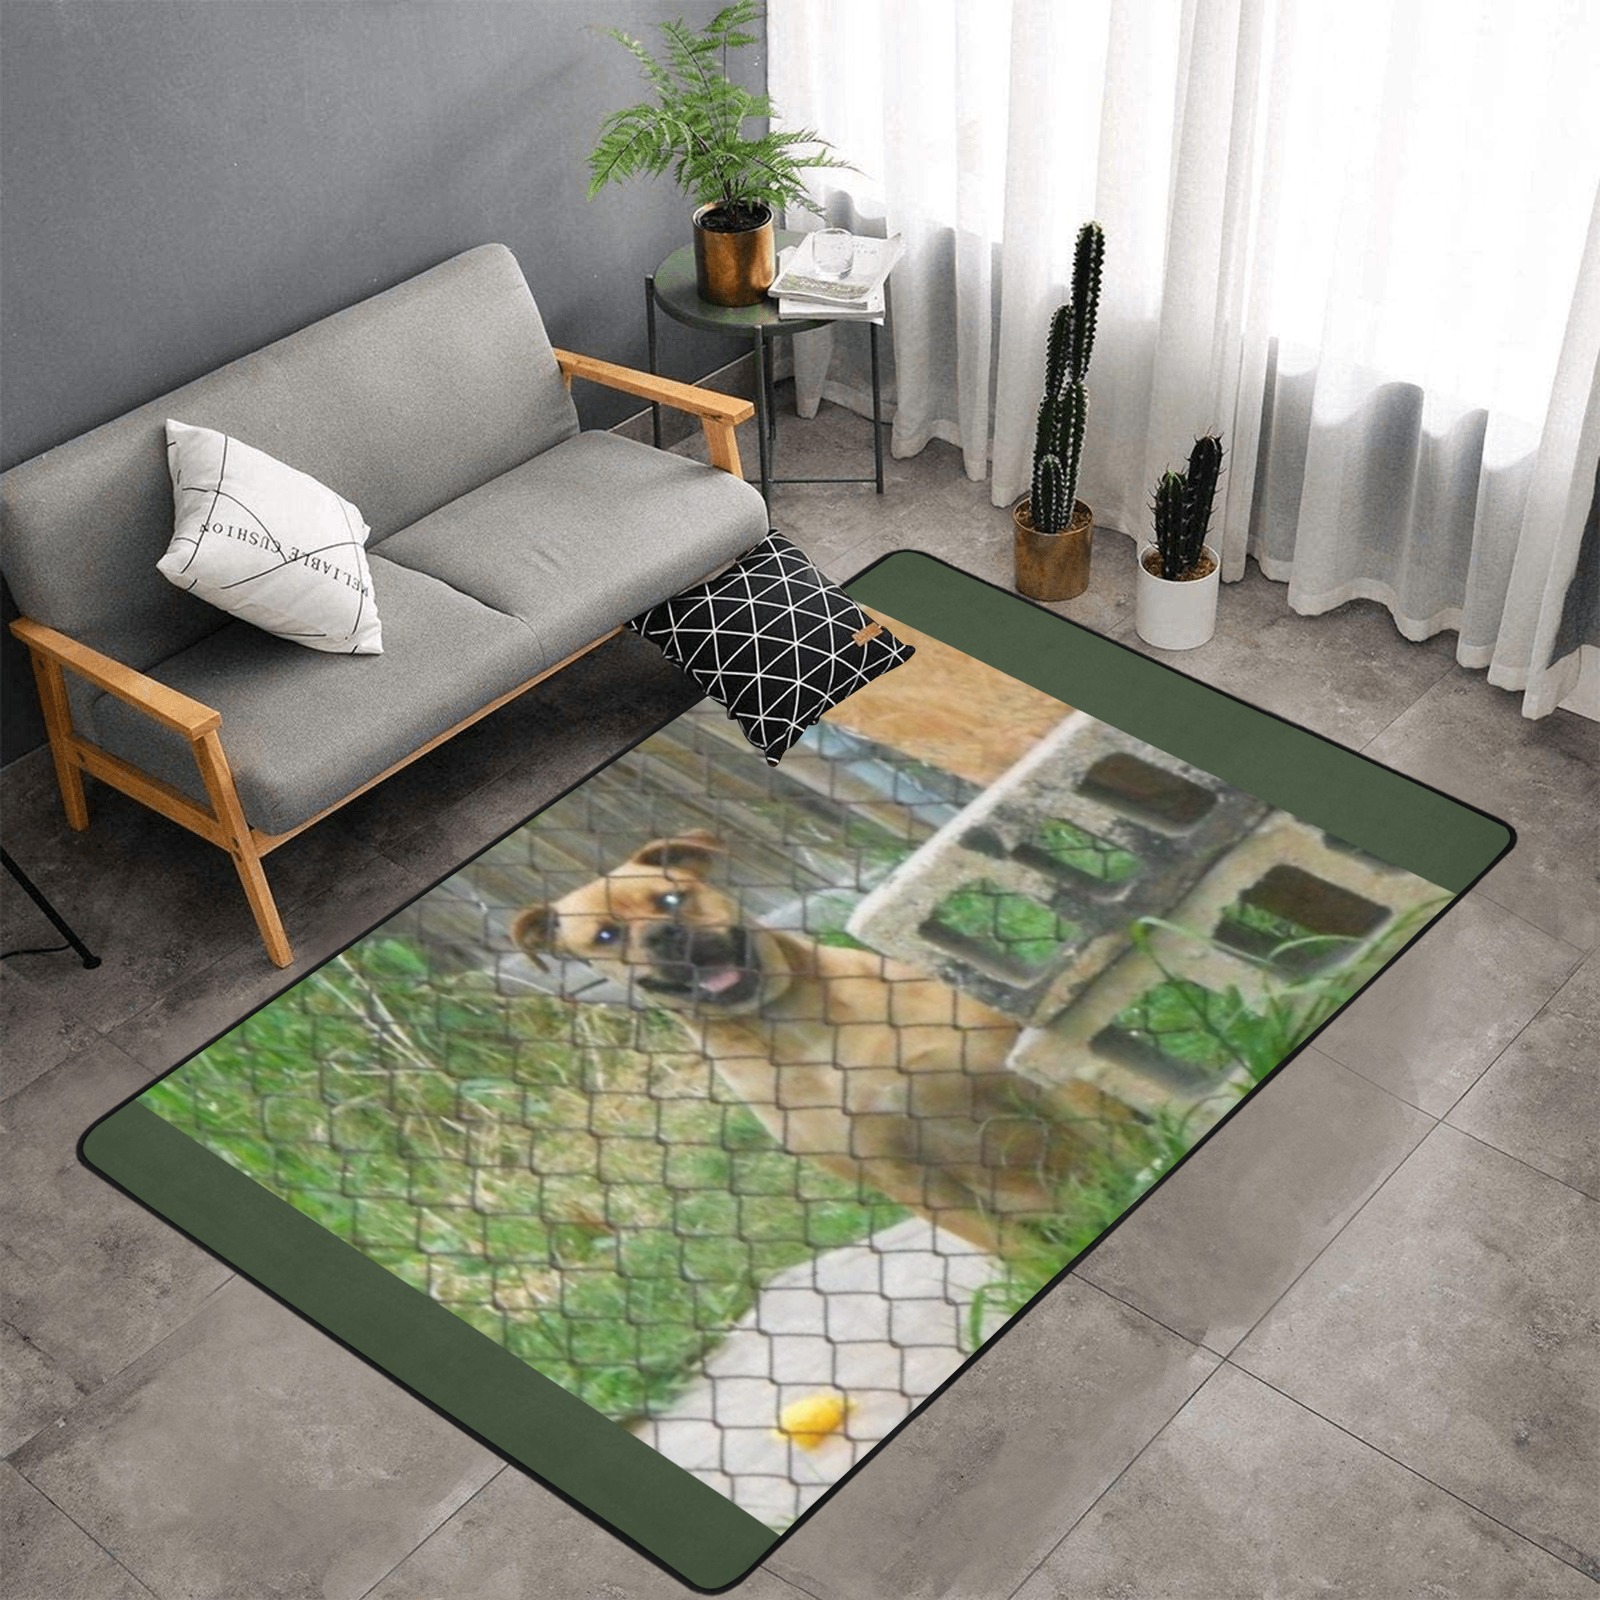 A Smiling Dog Area Rug with Black Binding 7'x5'